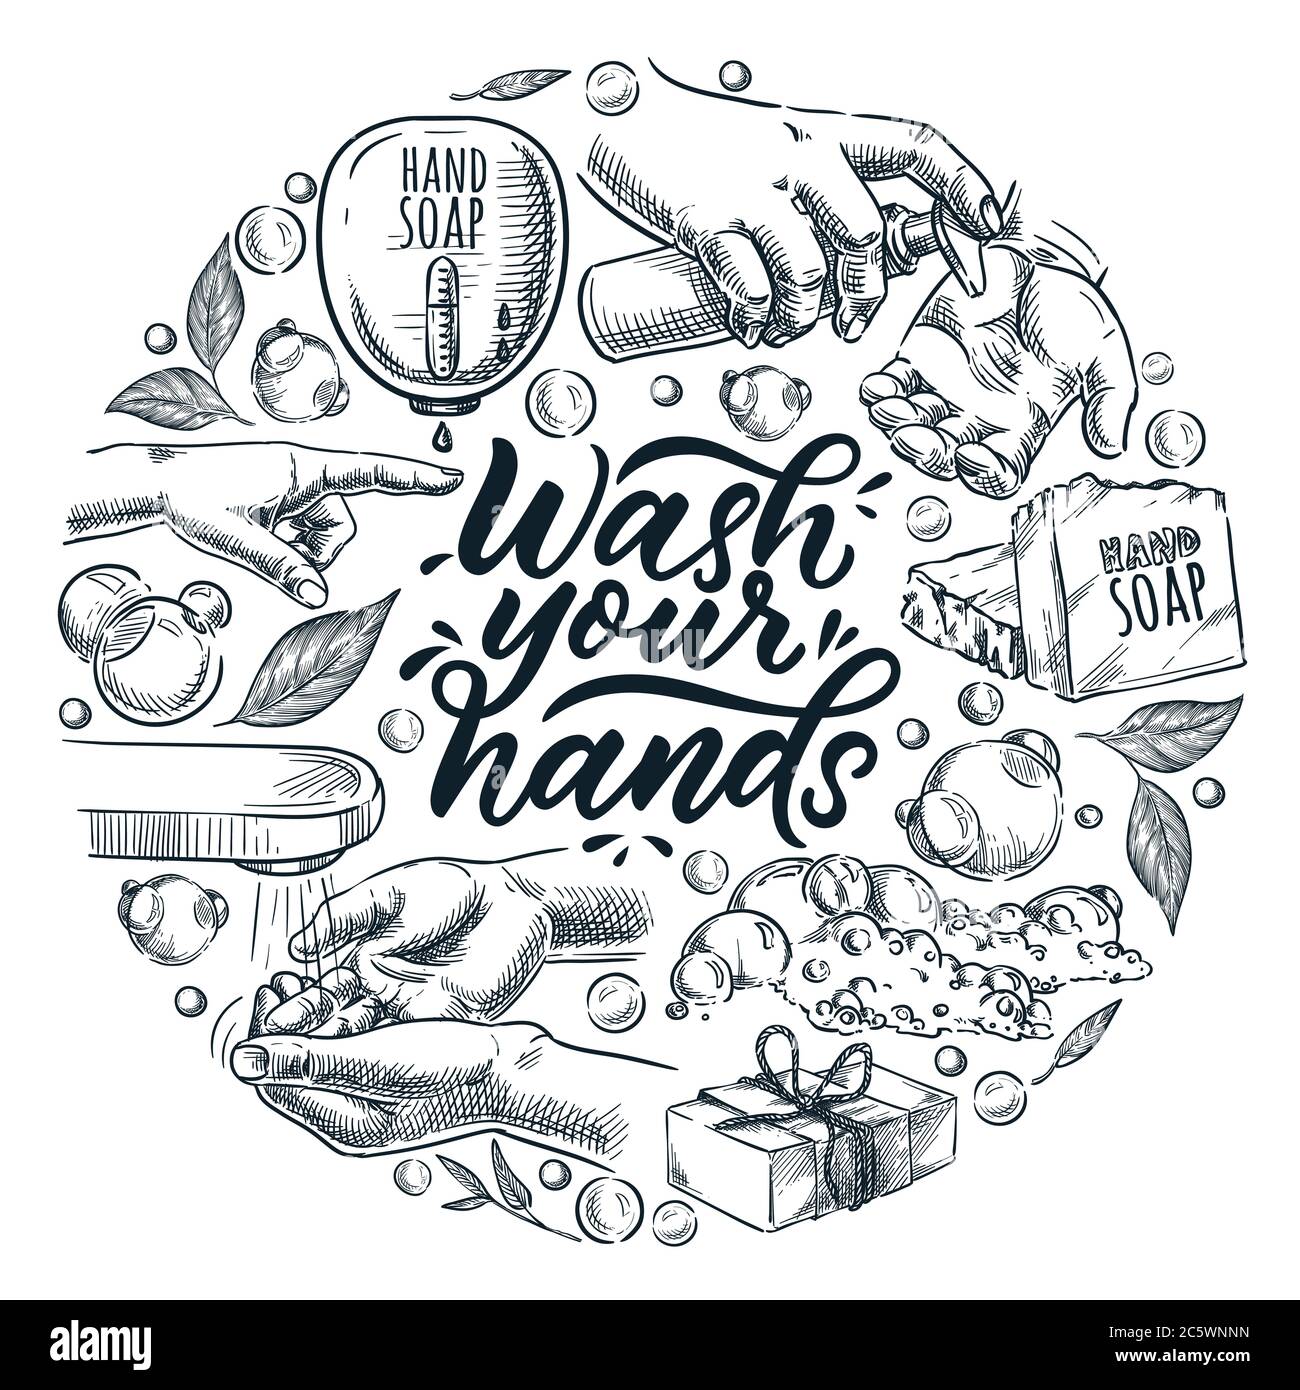 Wash your hands calligraphy lettering poster, banner, or label design template. Vector sketch illustration of human hand, water tap, soap and bubbles. Stock Vector